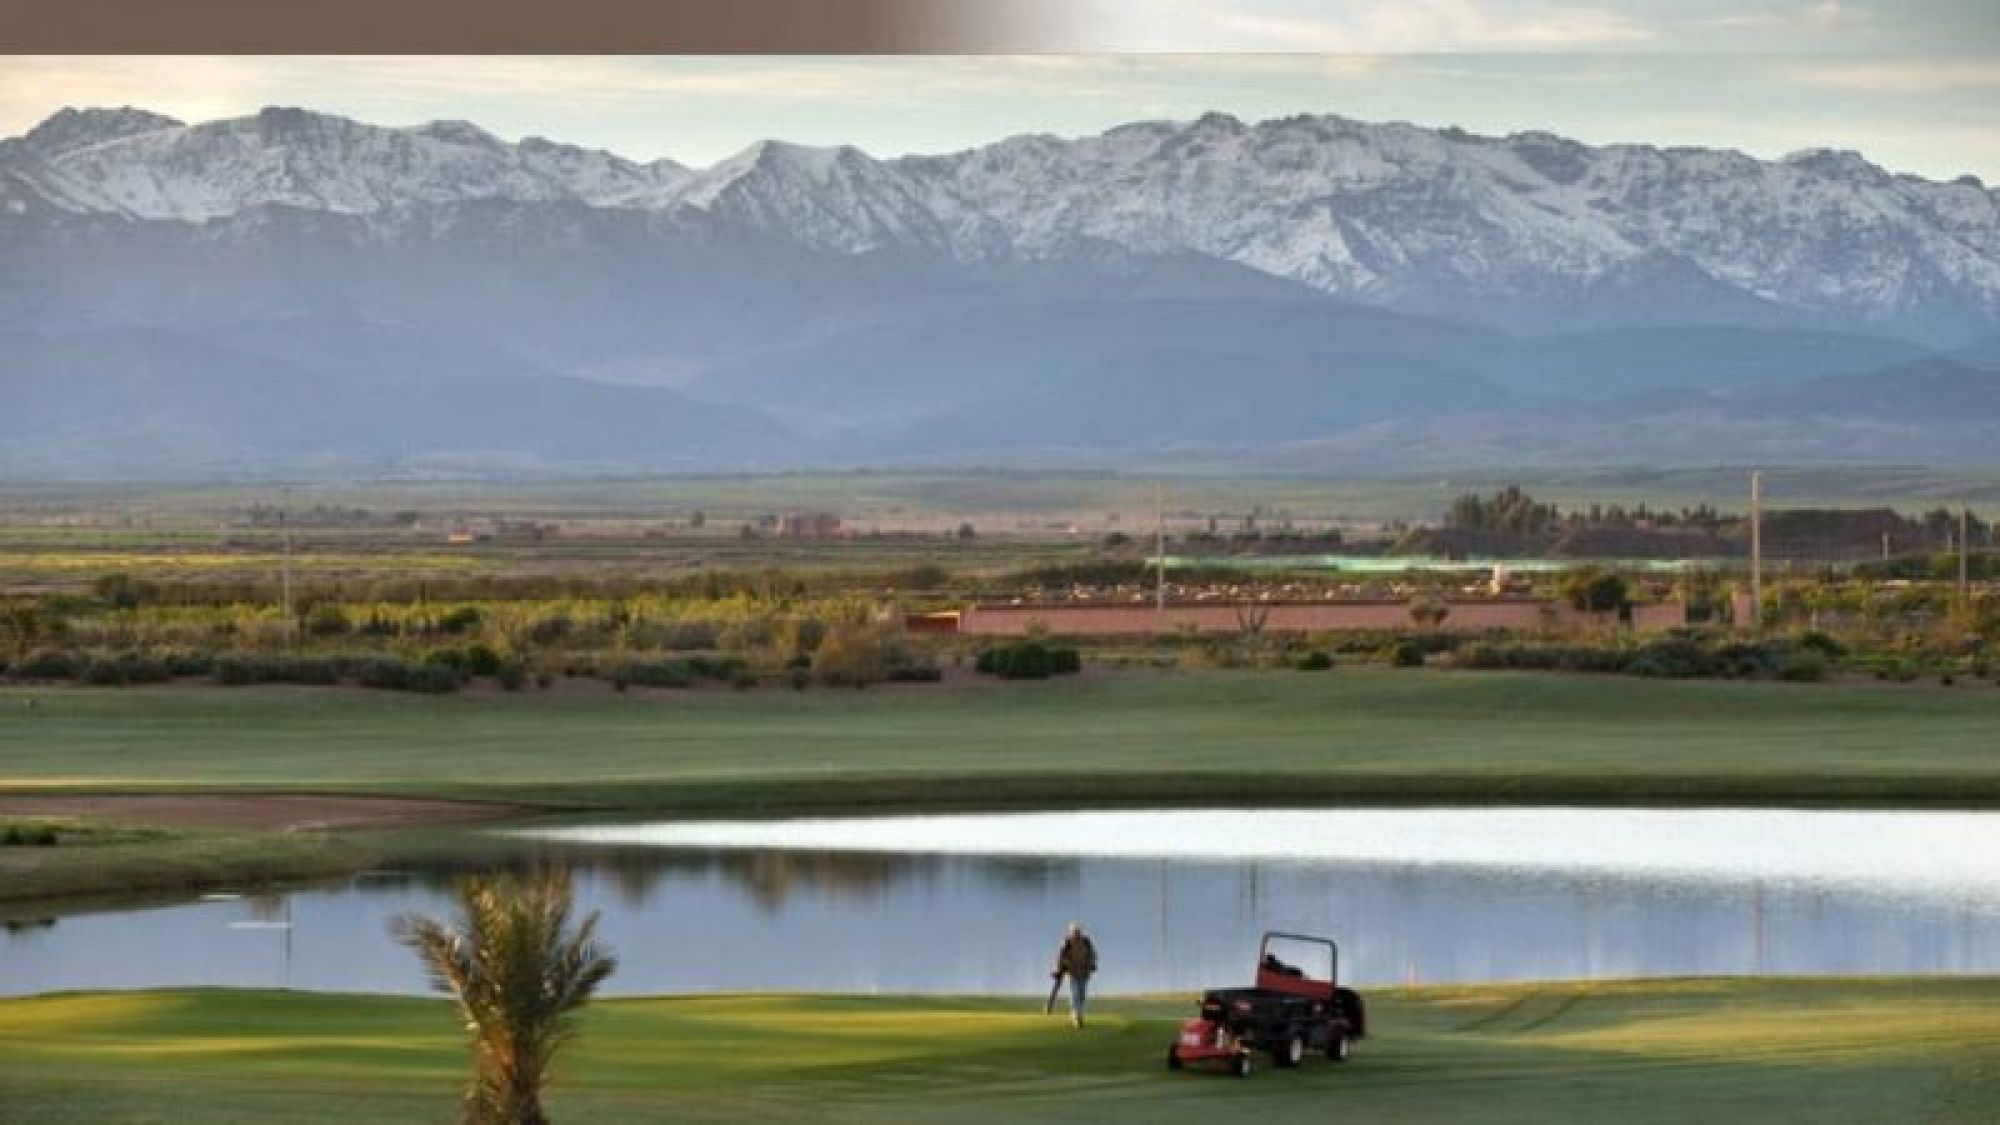 View Samanah Country Club's beautiful golf course in vibrant Morocco.